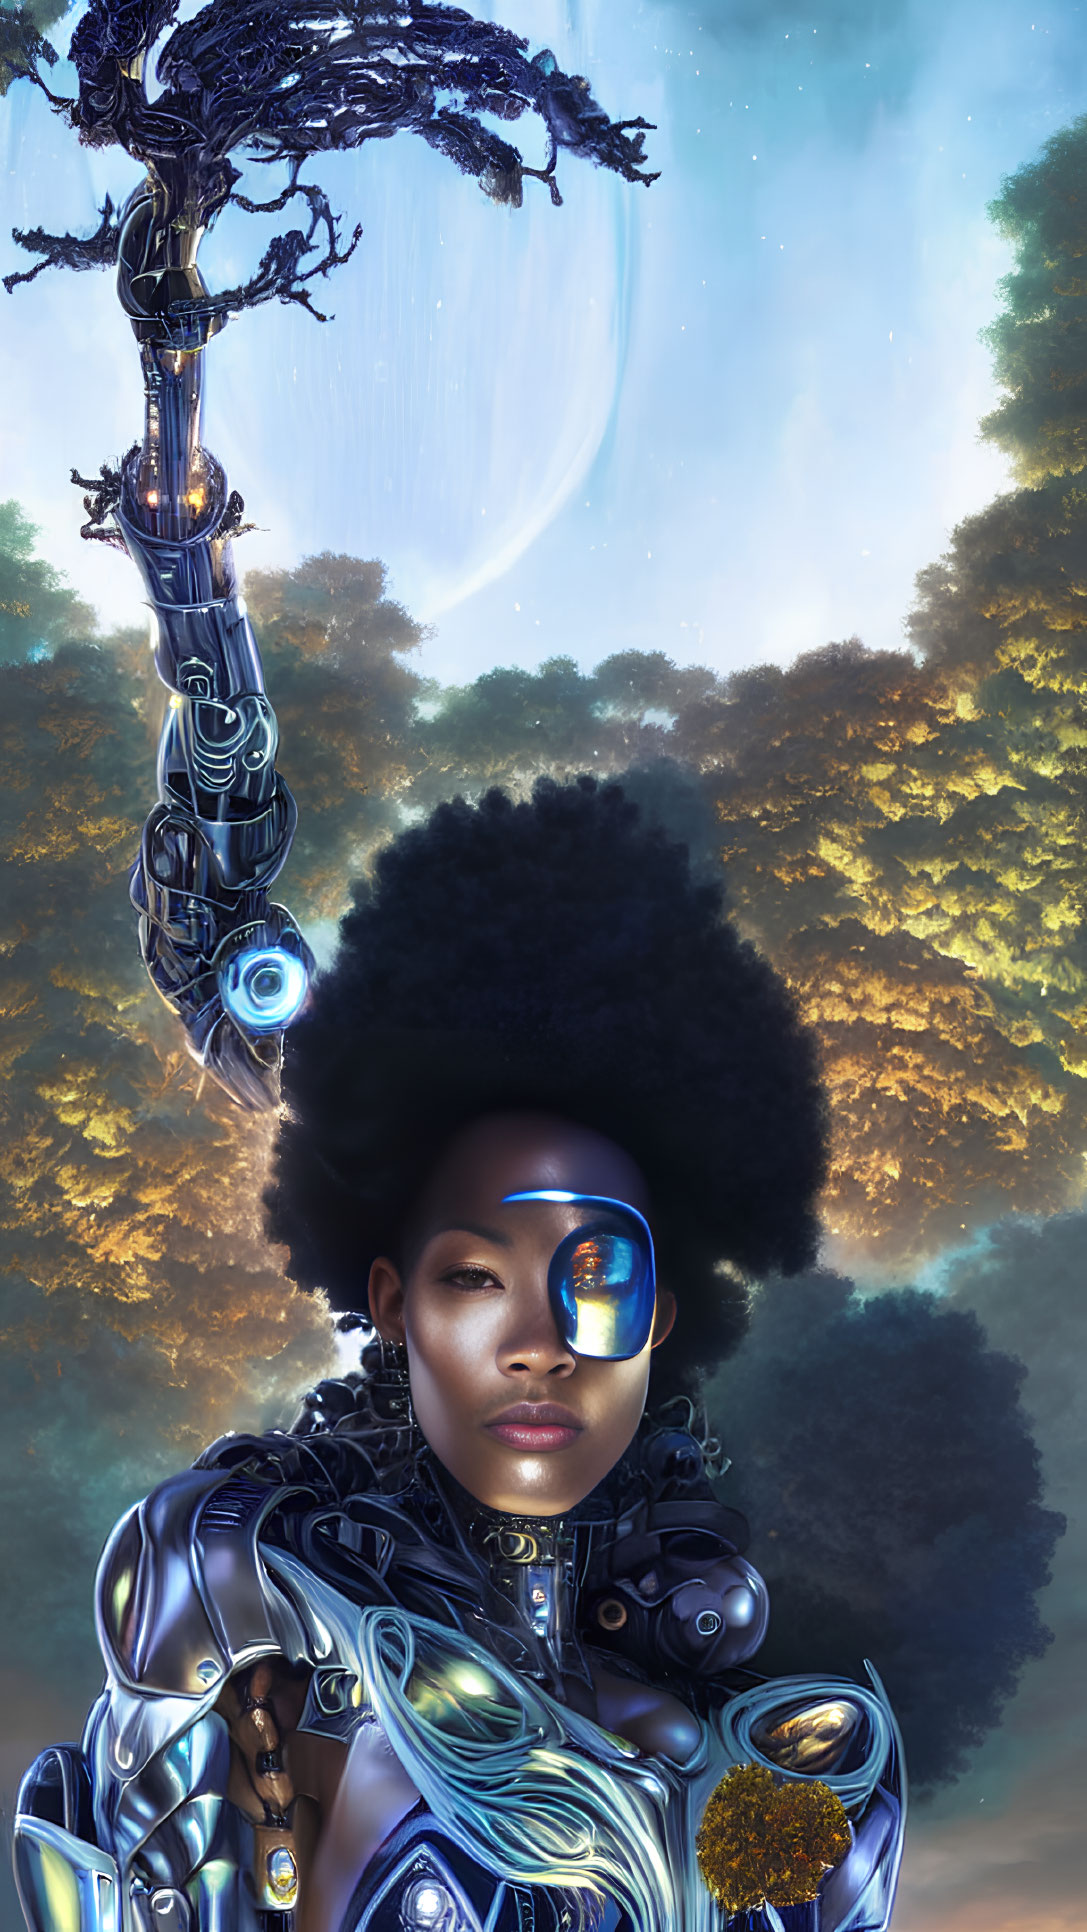 Afrofuturistic woman with cybernetic enhancements in celestial setting